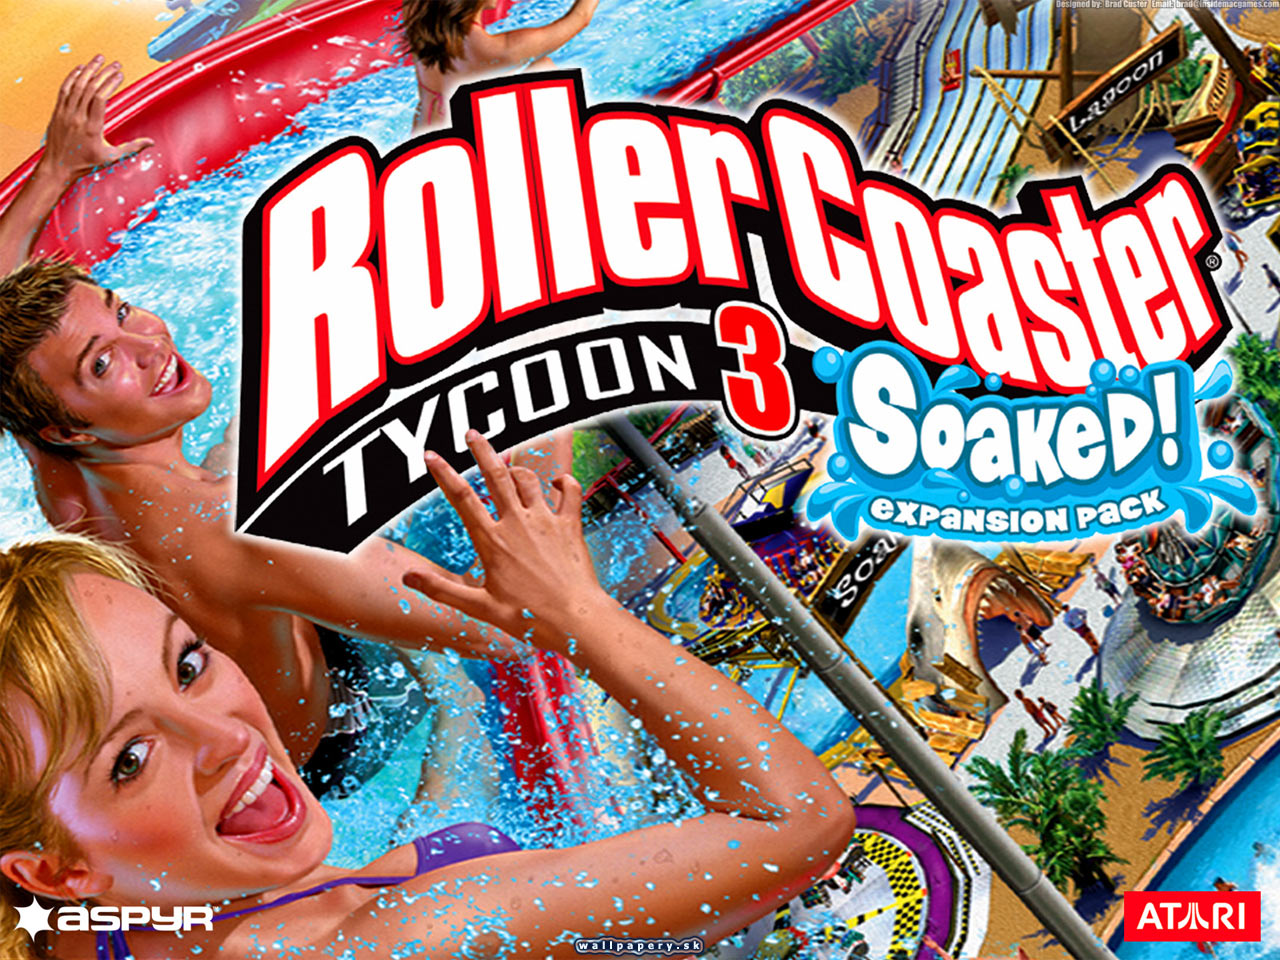 RollerCoaster Tycoon 3: Soaked! - wallpaper 6